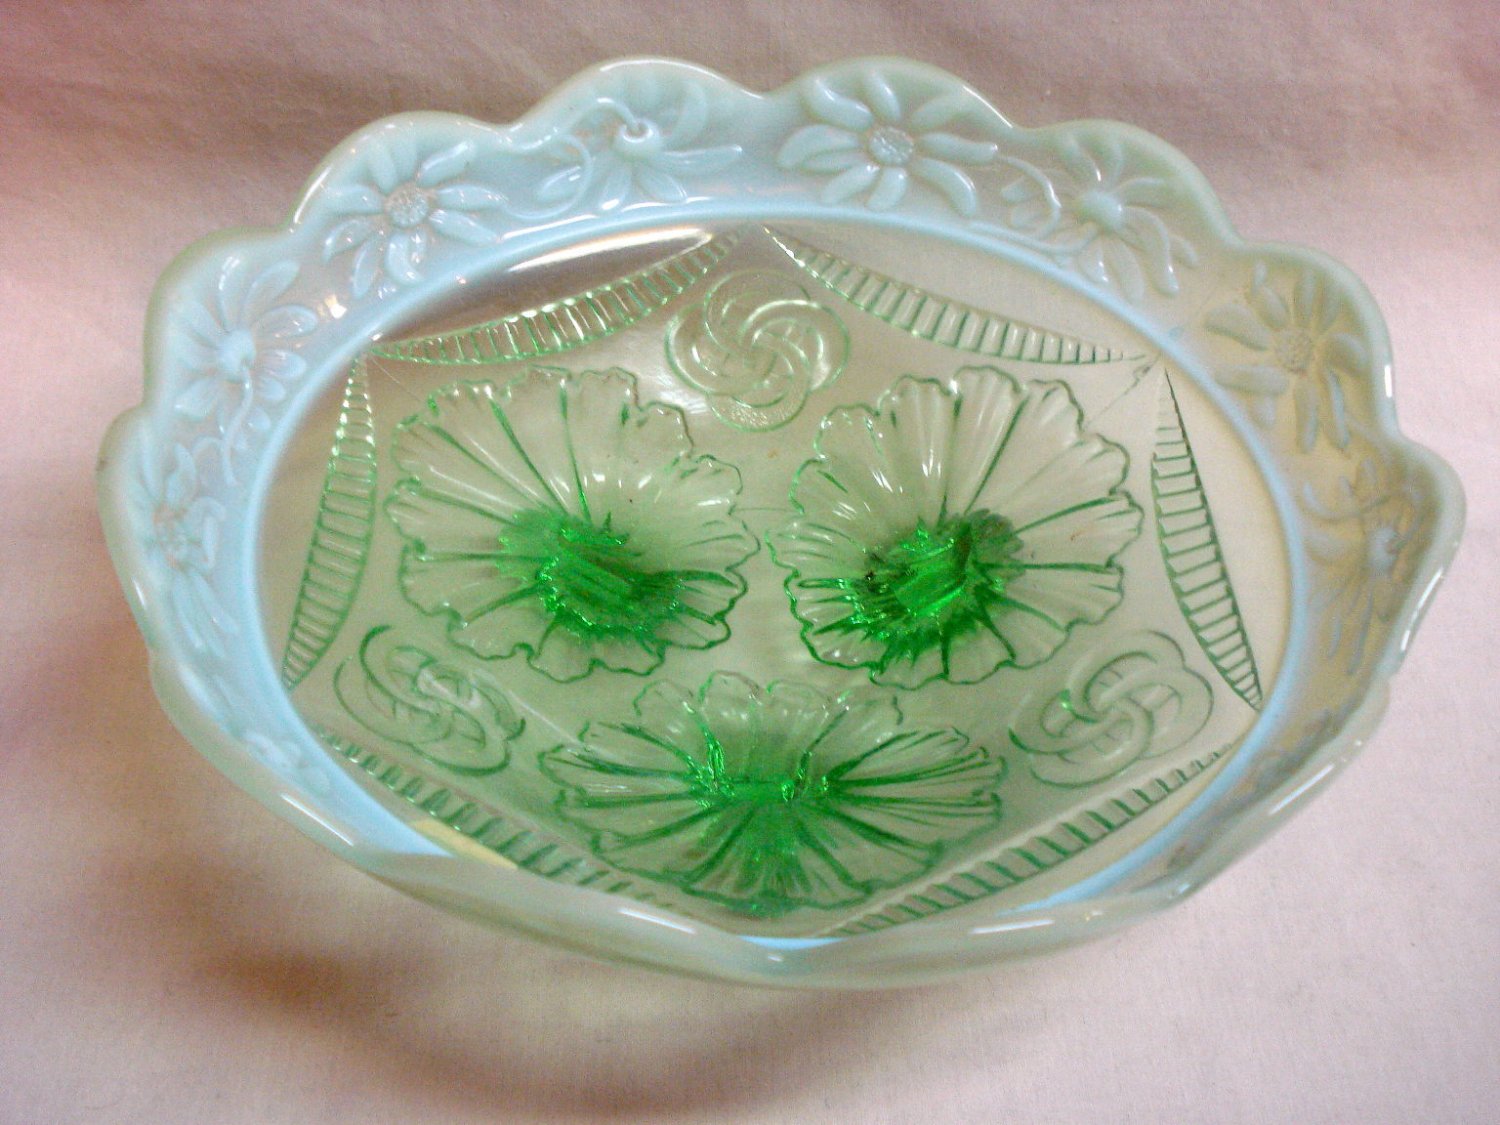 Northwood Green Opalescent Ruffles and Rings Bowl, 1905